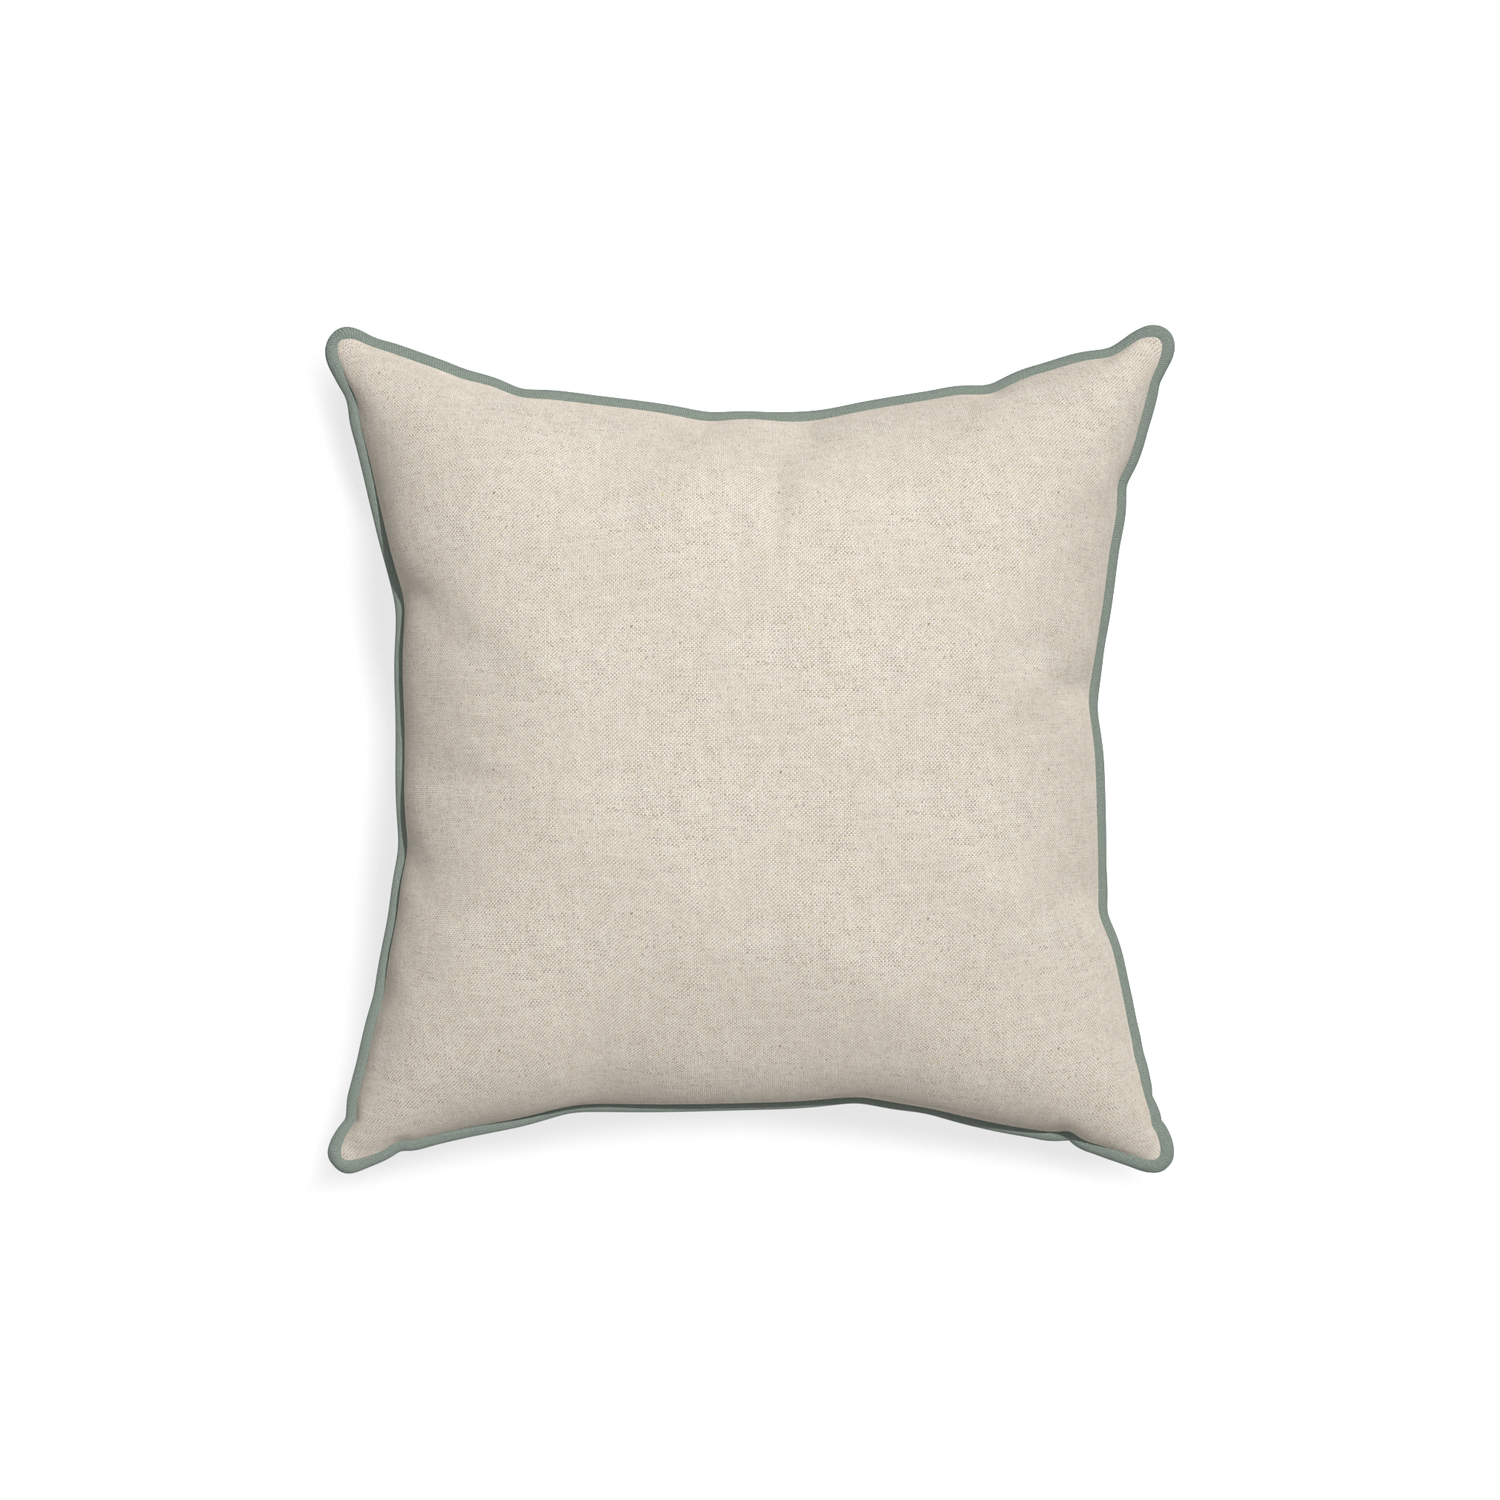 18-square oat custom light brownpillow with sage piping on white background